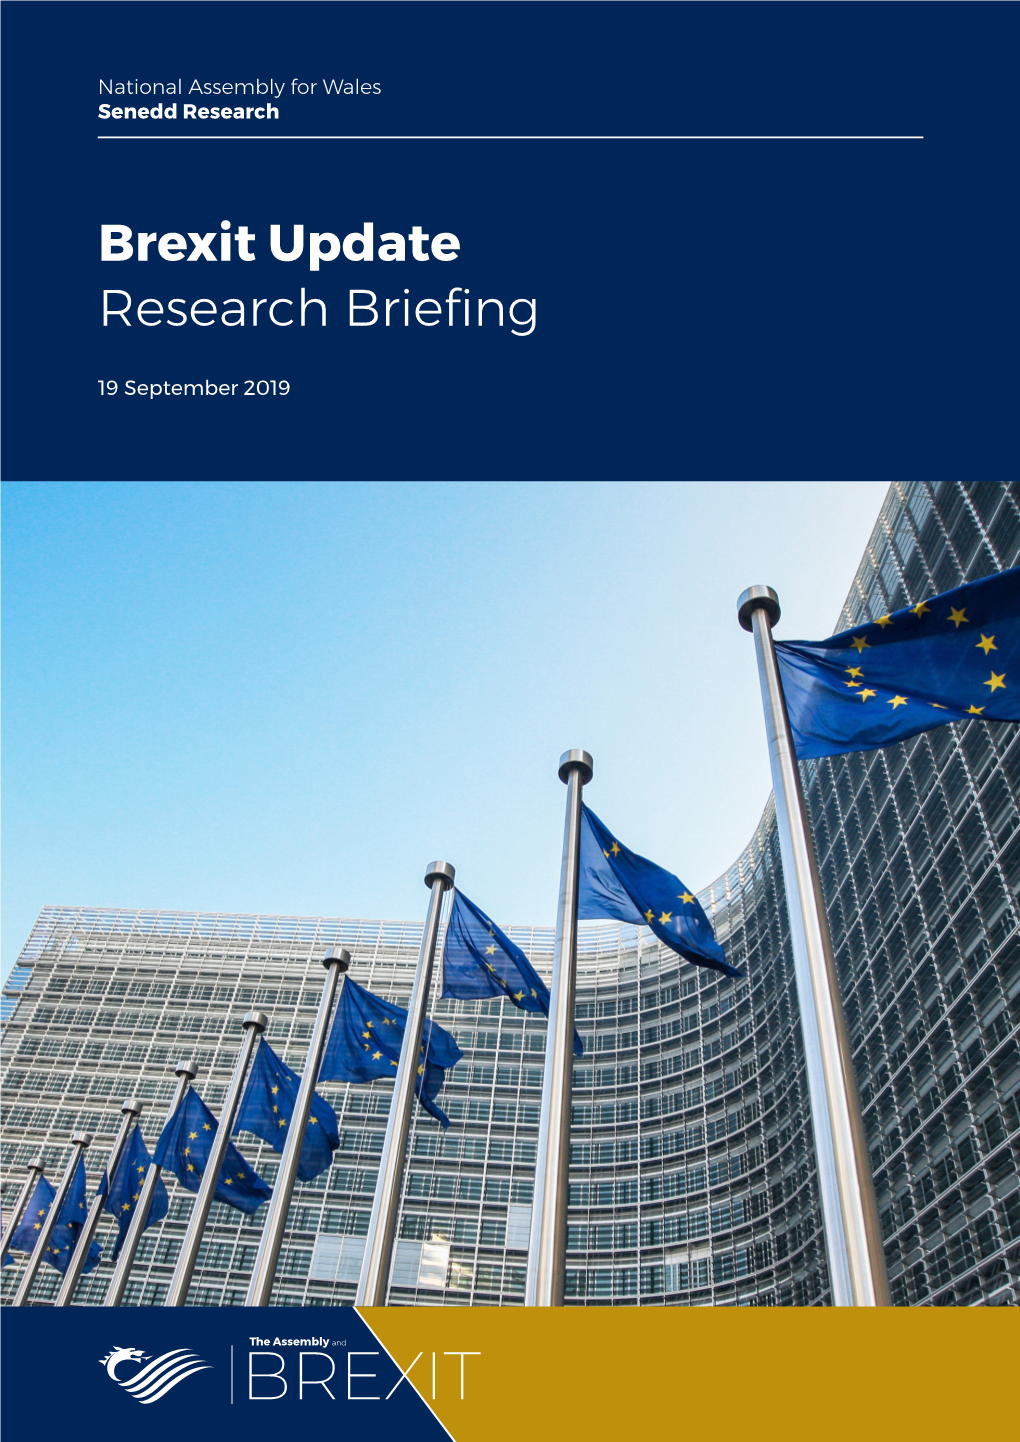 Brexit Update Research Briefing